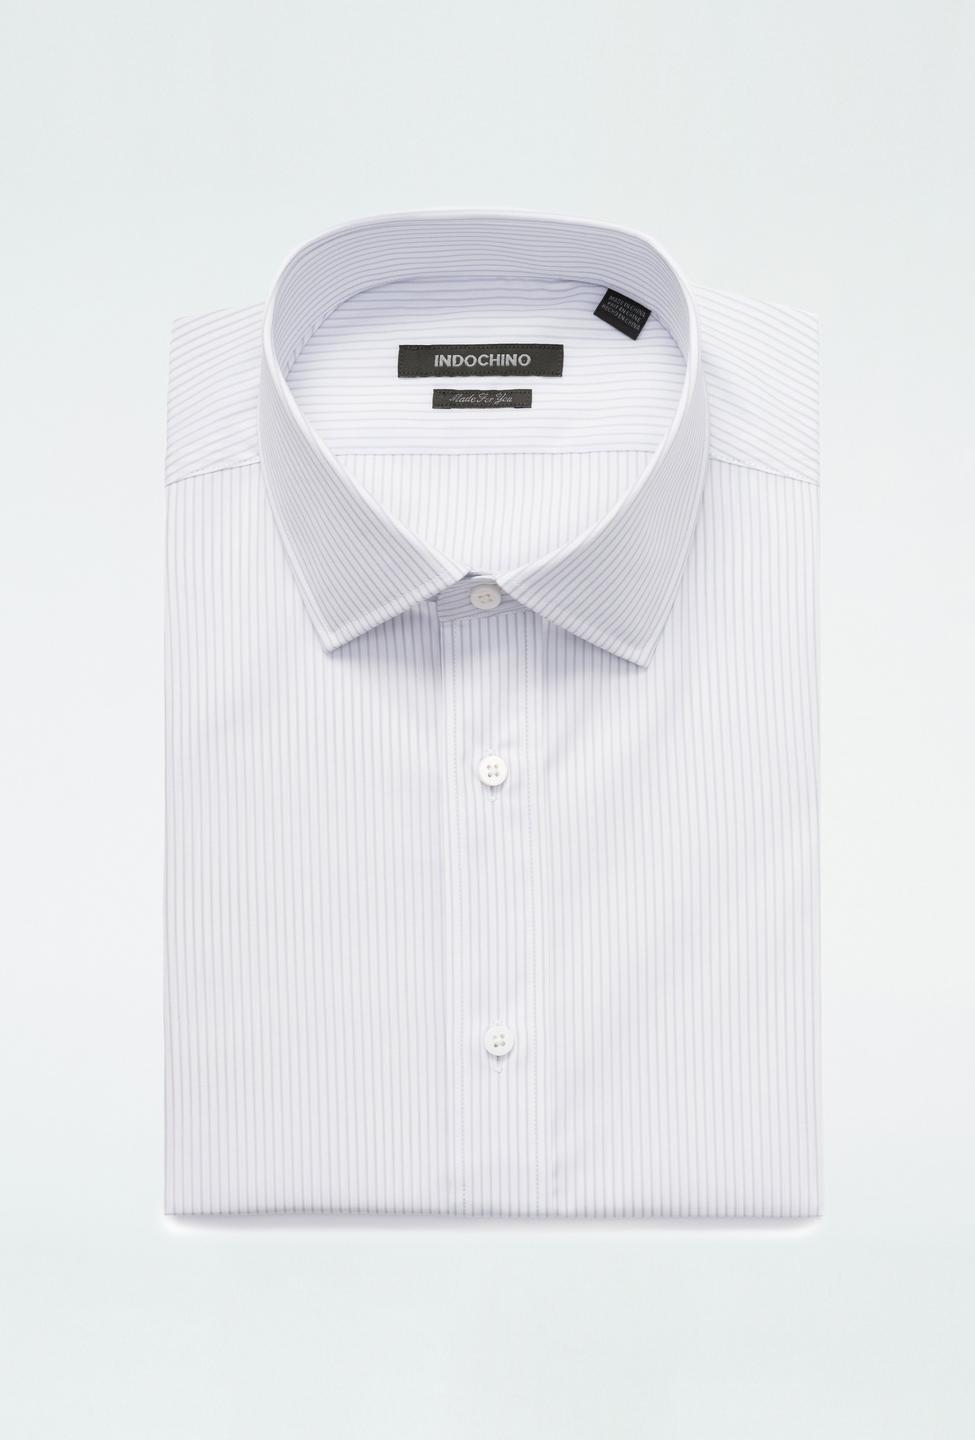 Gray shirt - Harrow Striped Design from Premium Indochino Collection